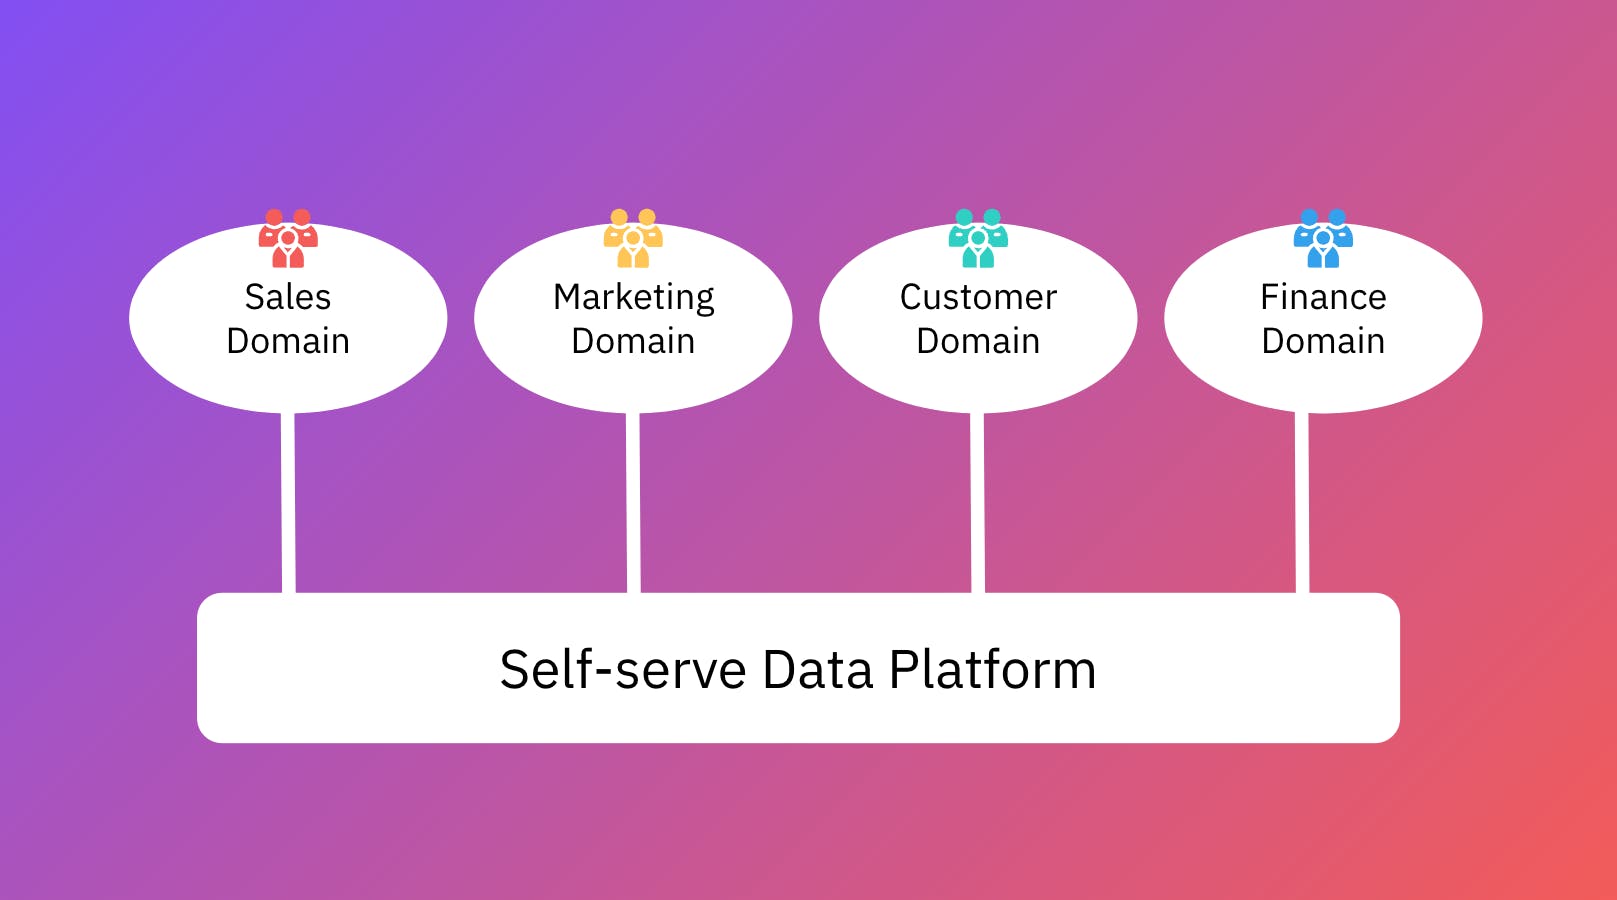 The aim of a self-serve data platform is to enable autonomy in the domains.